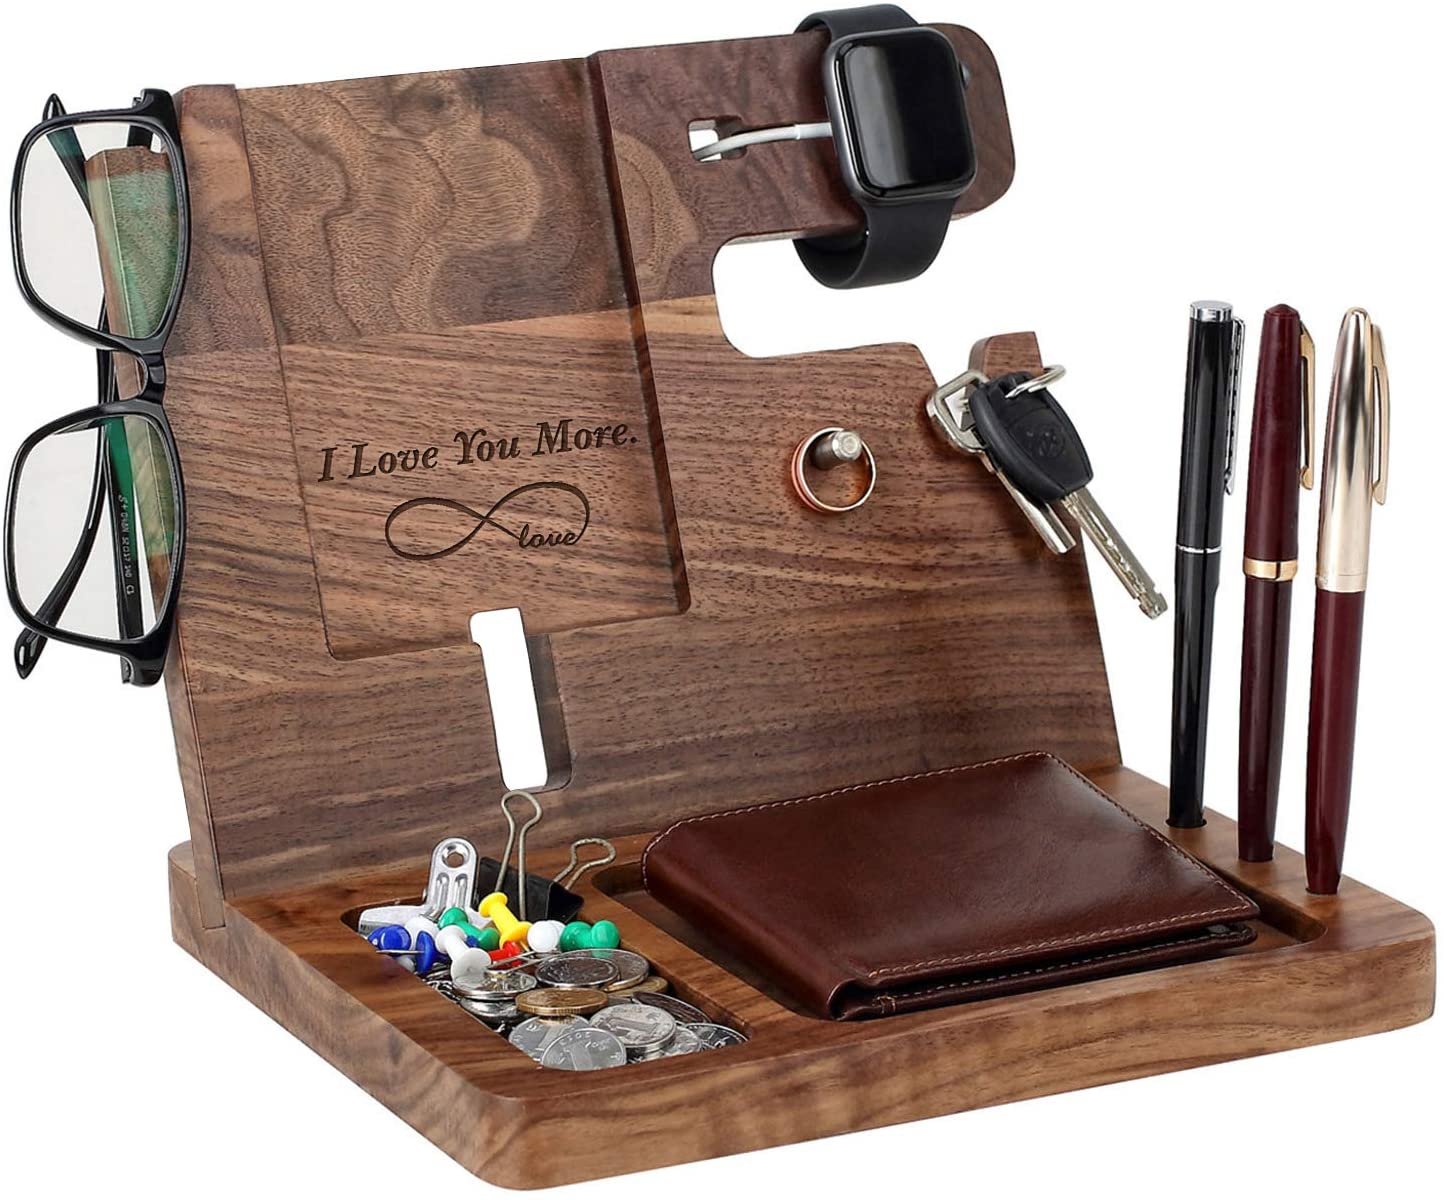 21 Perfectly Personalized Gifts for Men in 2021 - giftlab